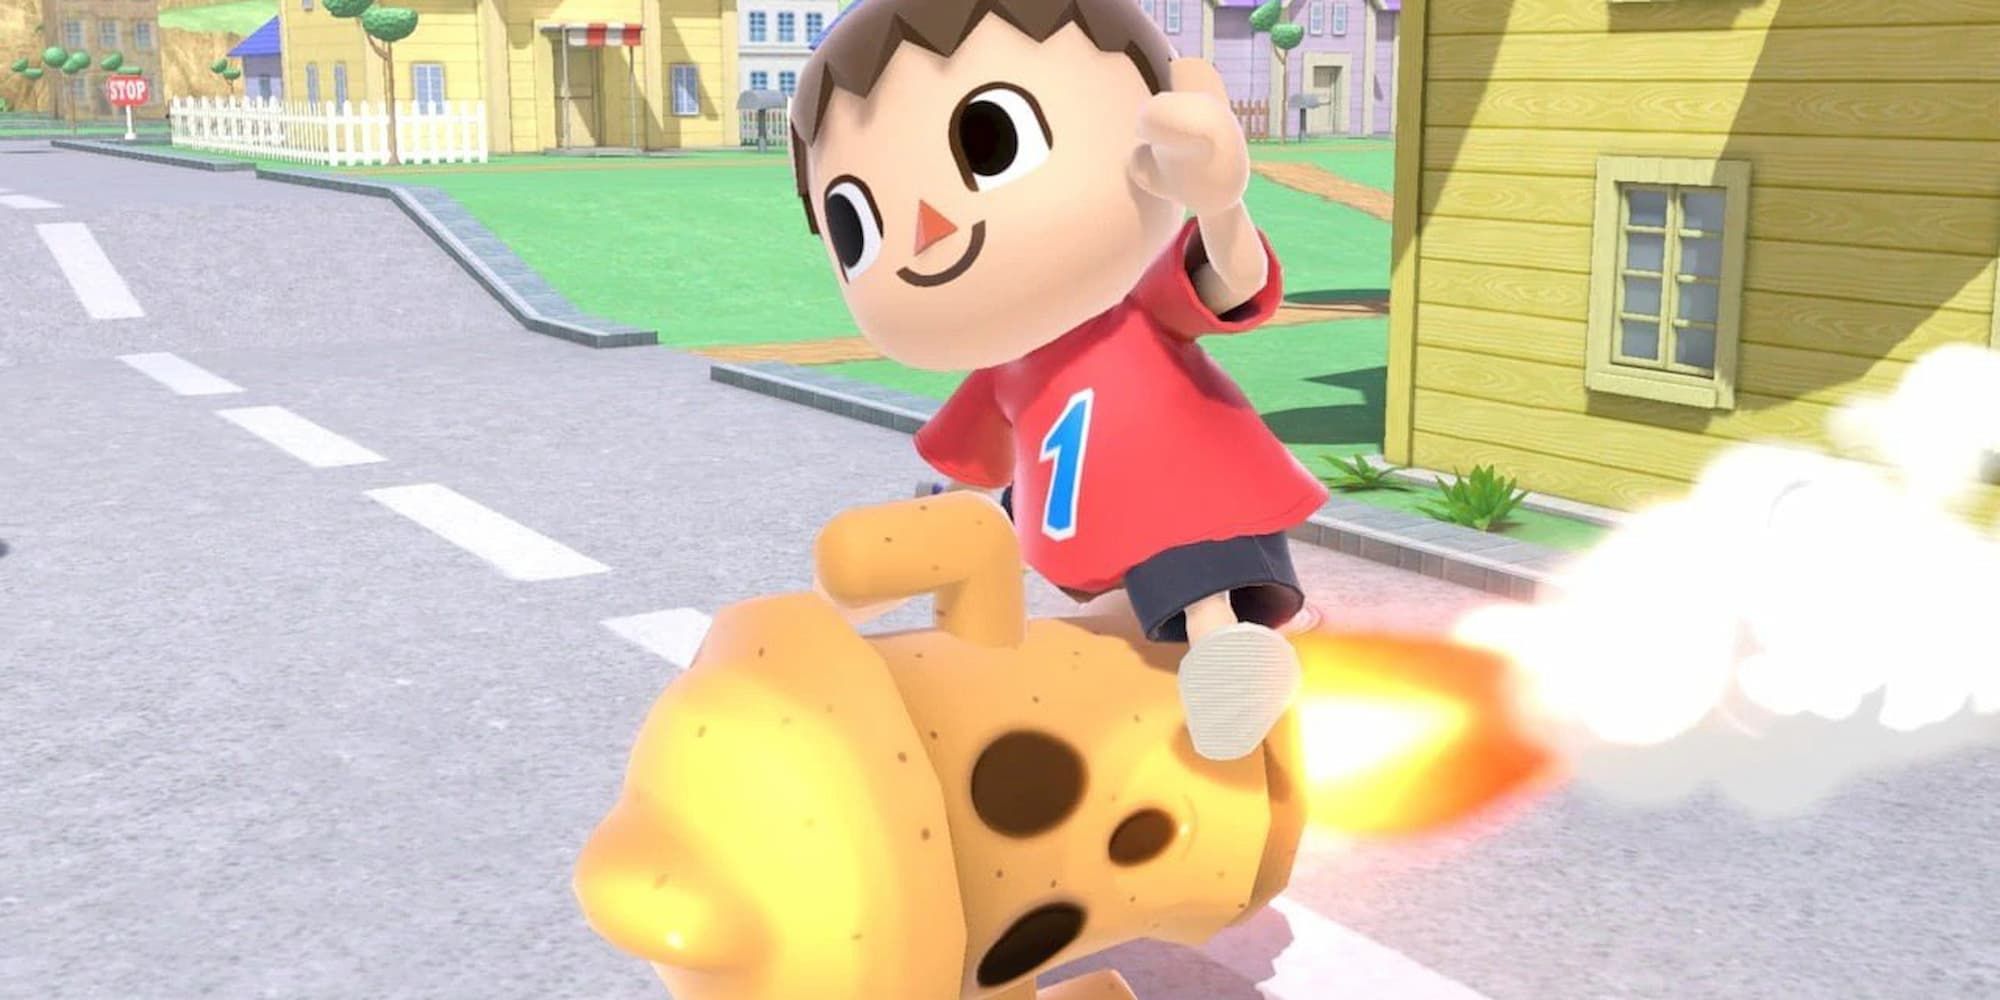 The Villager from Animal Crossing rides on a rocket powered Gyroid in Super Smash Bros.